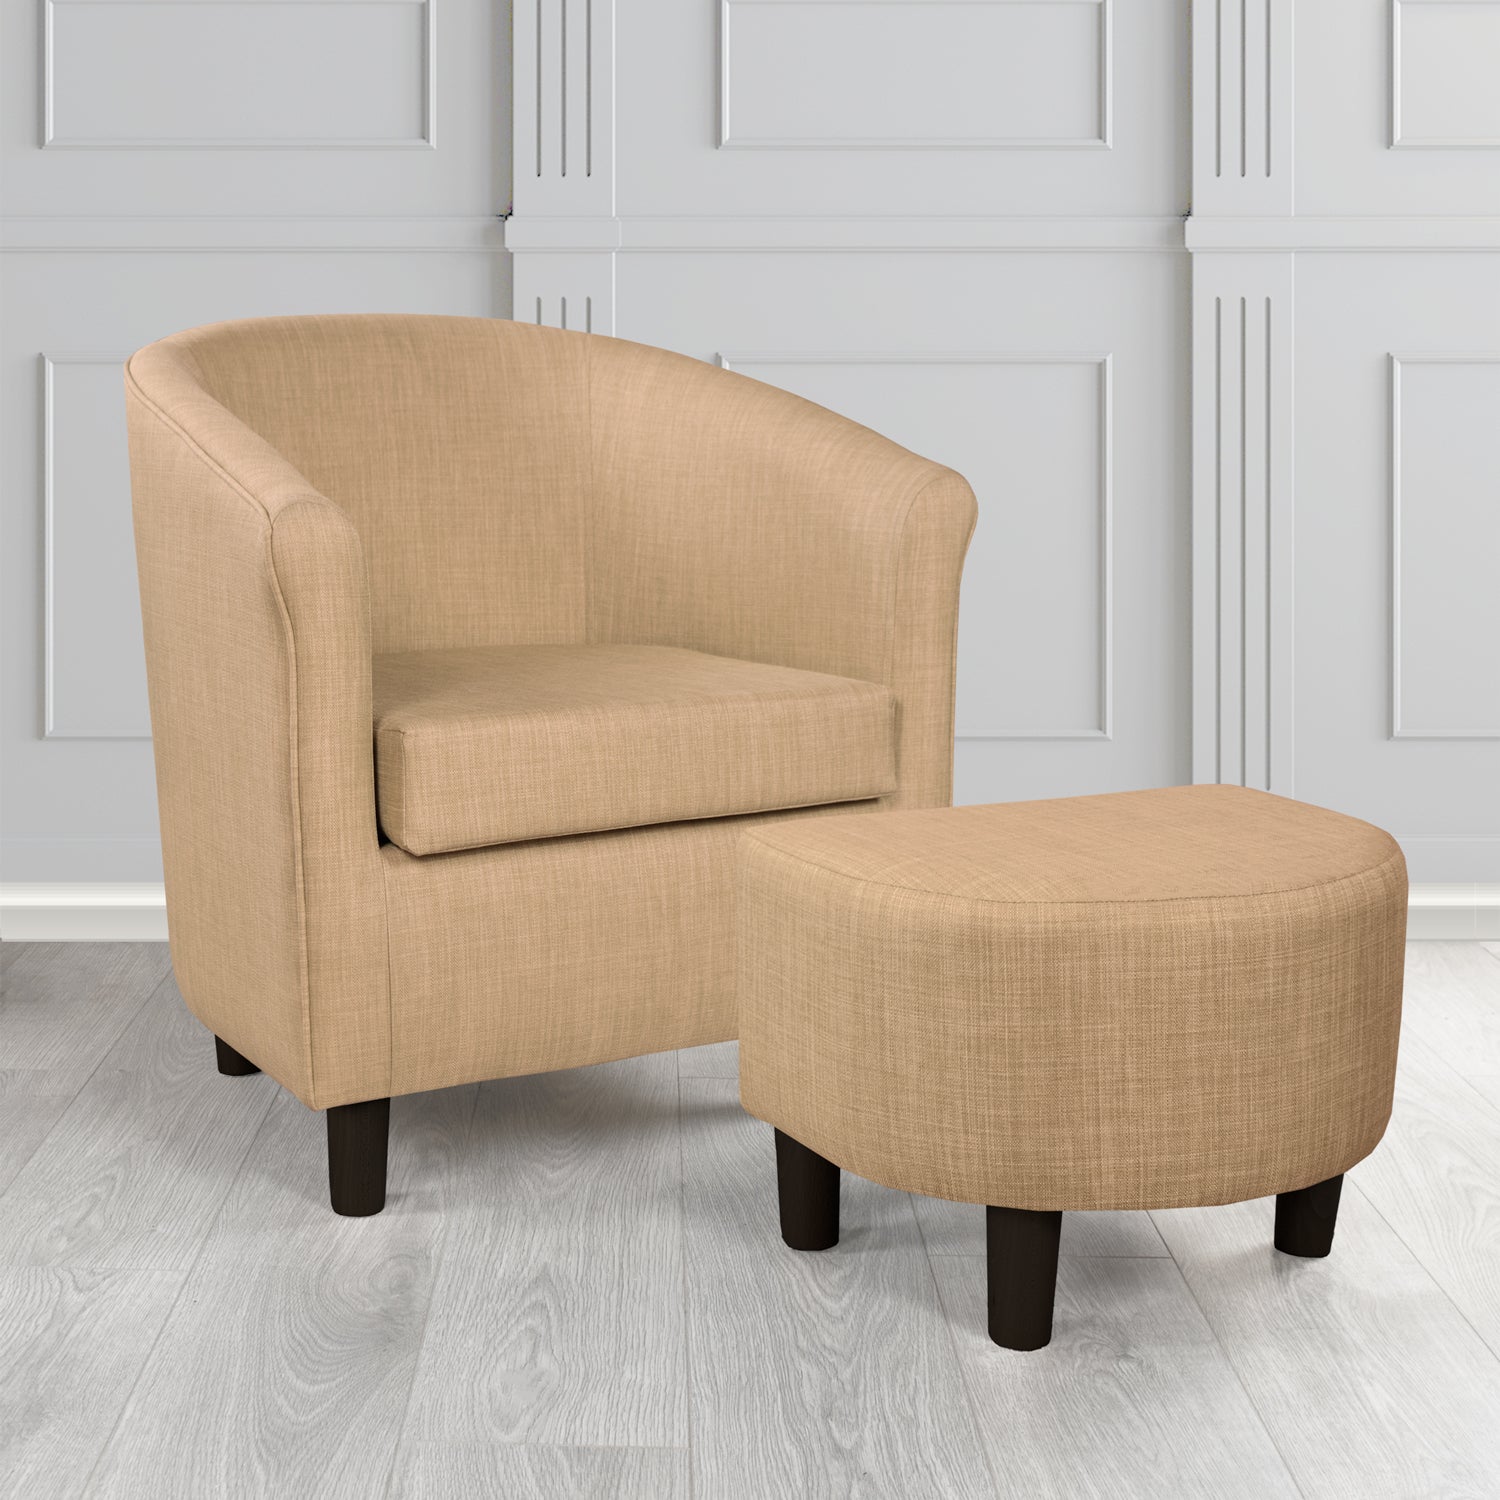 Tuscany Charles Honey Linen Plain Fabric Tub Chair with Dee Footstool Set - The Tub Chair Shop